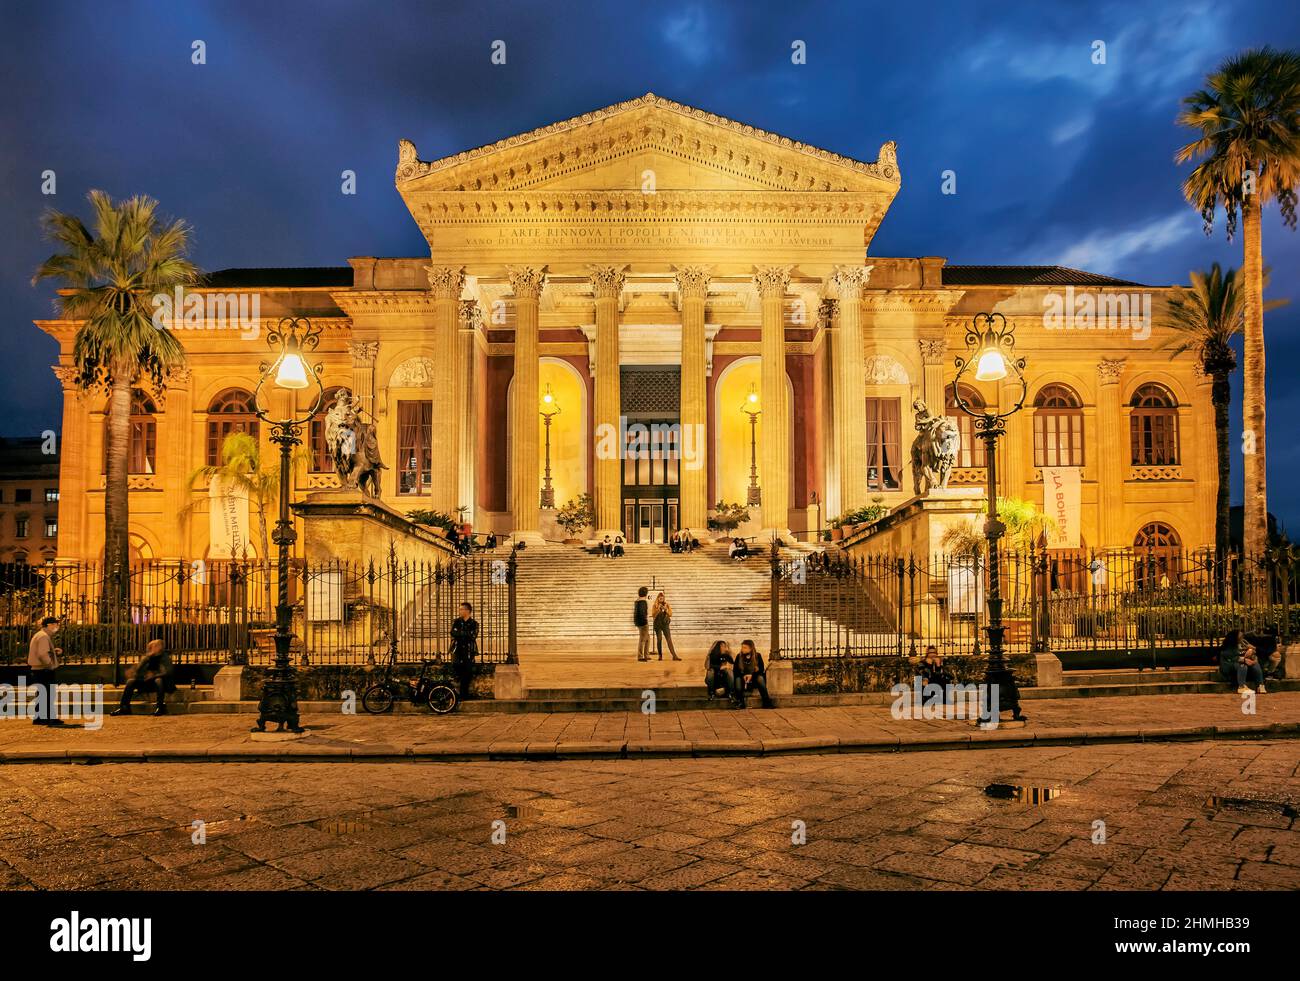 Teatro Massimo opera house in the old town at dusk, Palermo, Sicily, Italy Stock Photo